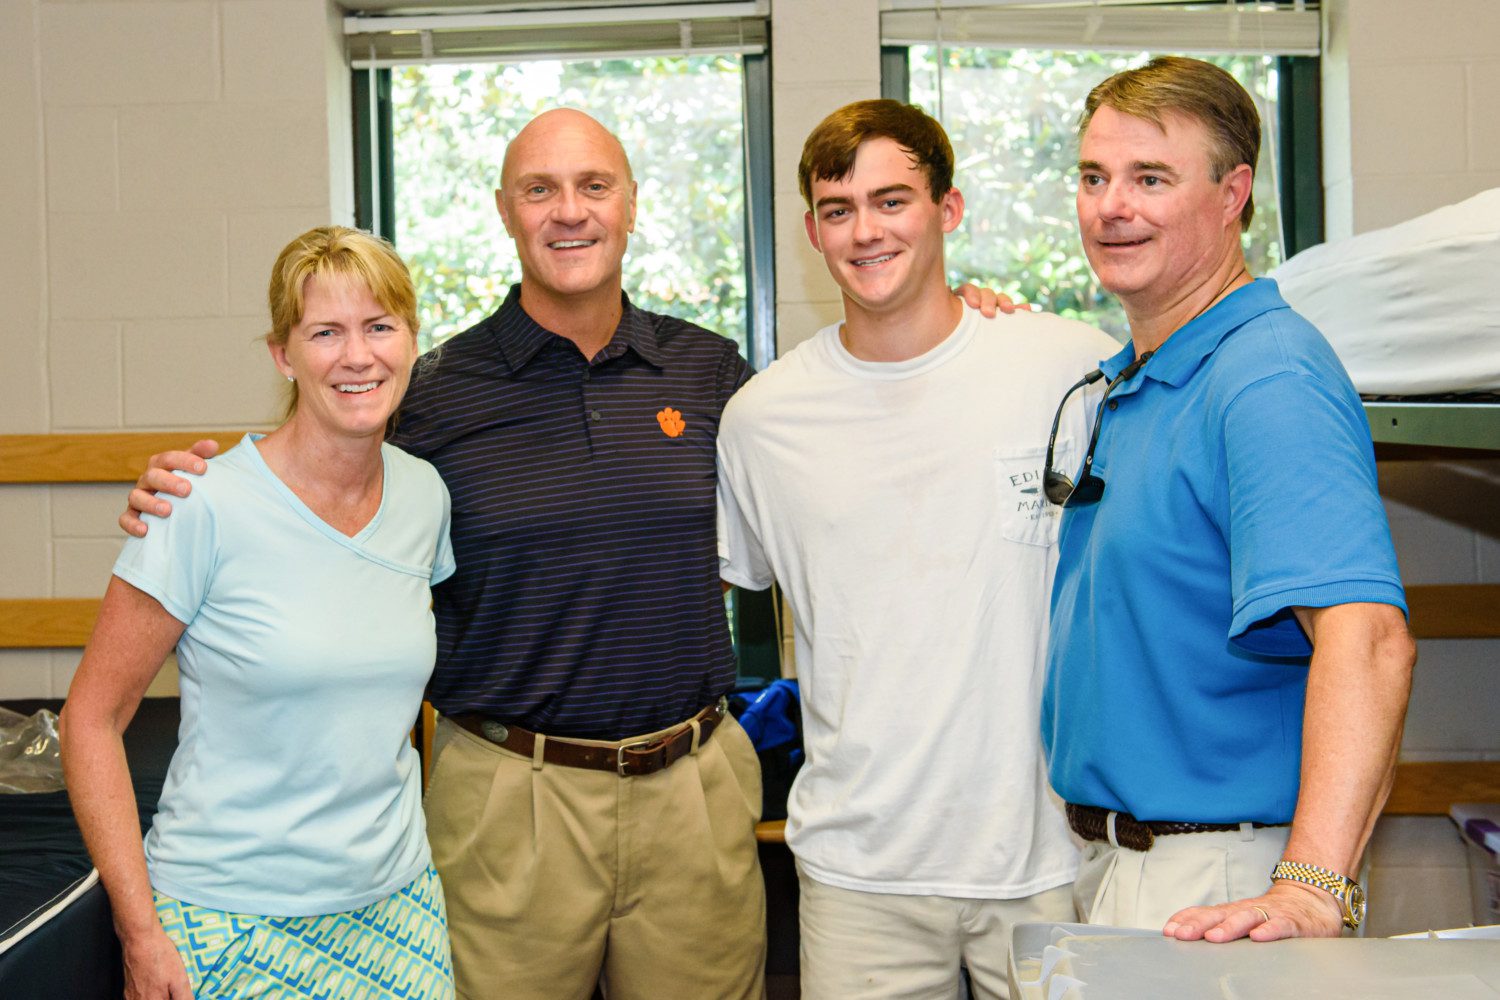 John Gressette, pictured alongside President Jim Clements and his parents from Move-In Day 2017, currently serves as president of the Interfraternity Council at Clemson.